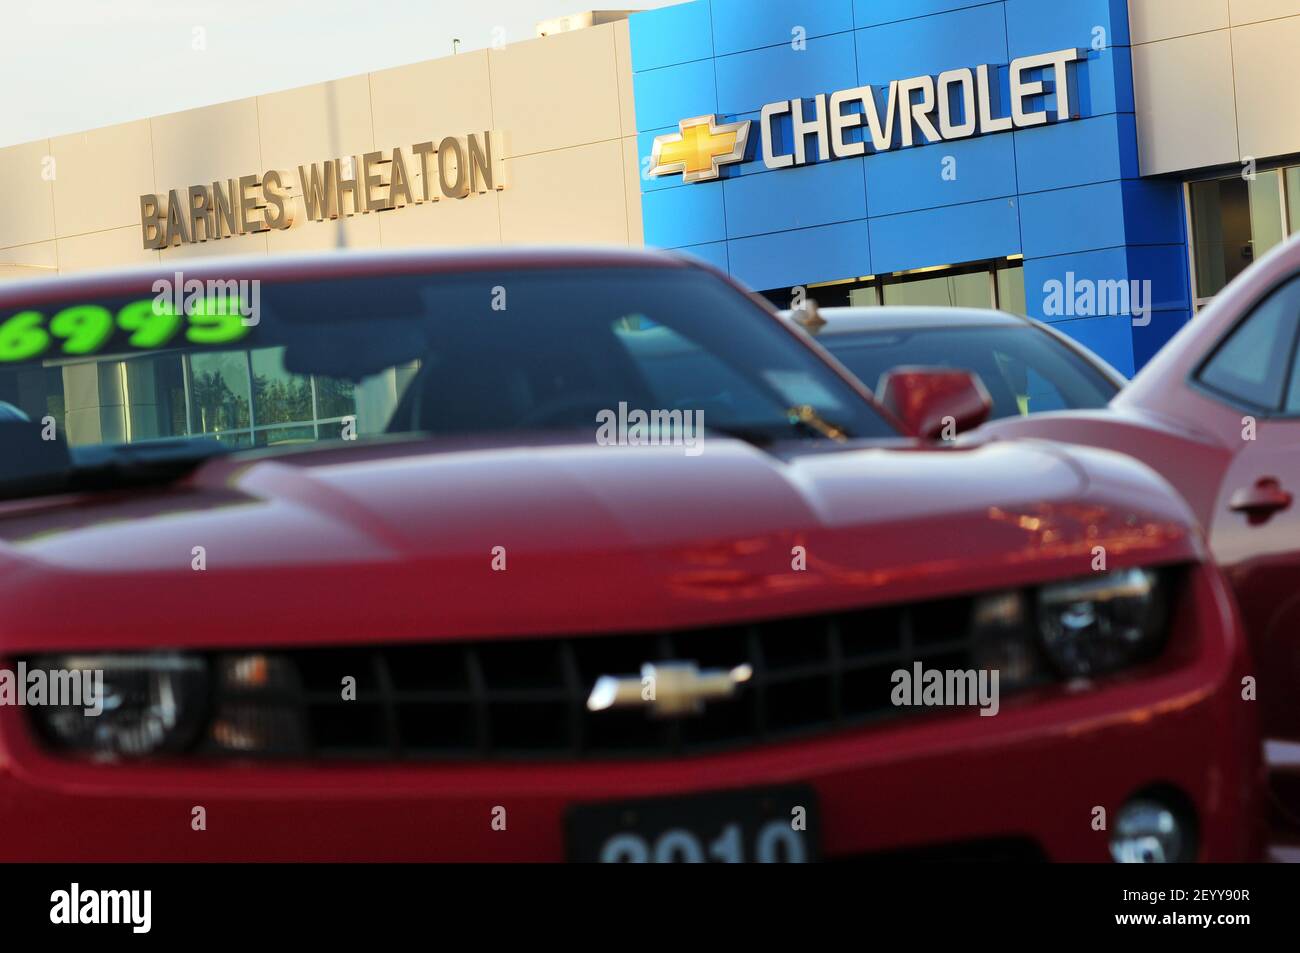 30 September 2012 - Surrey, B.C., Canada - A Chevrolet Camero vehicle is seen in the lot at the Barnes Wheaton GM dealership. Photo Credit: Adrian Brown / Sipa USA. Stock Photo